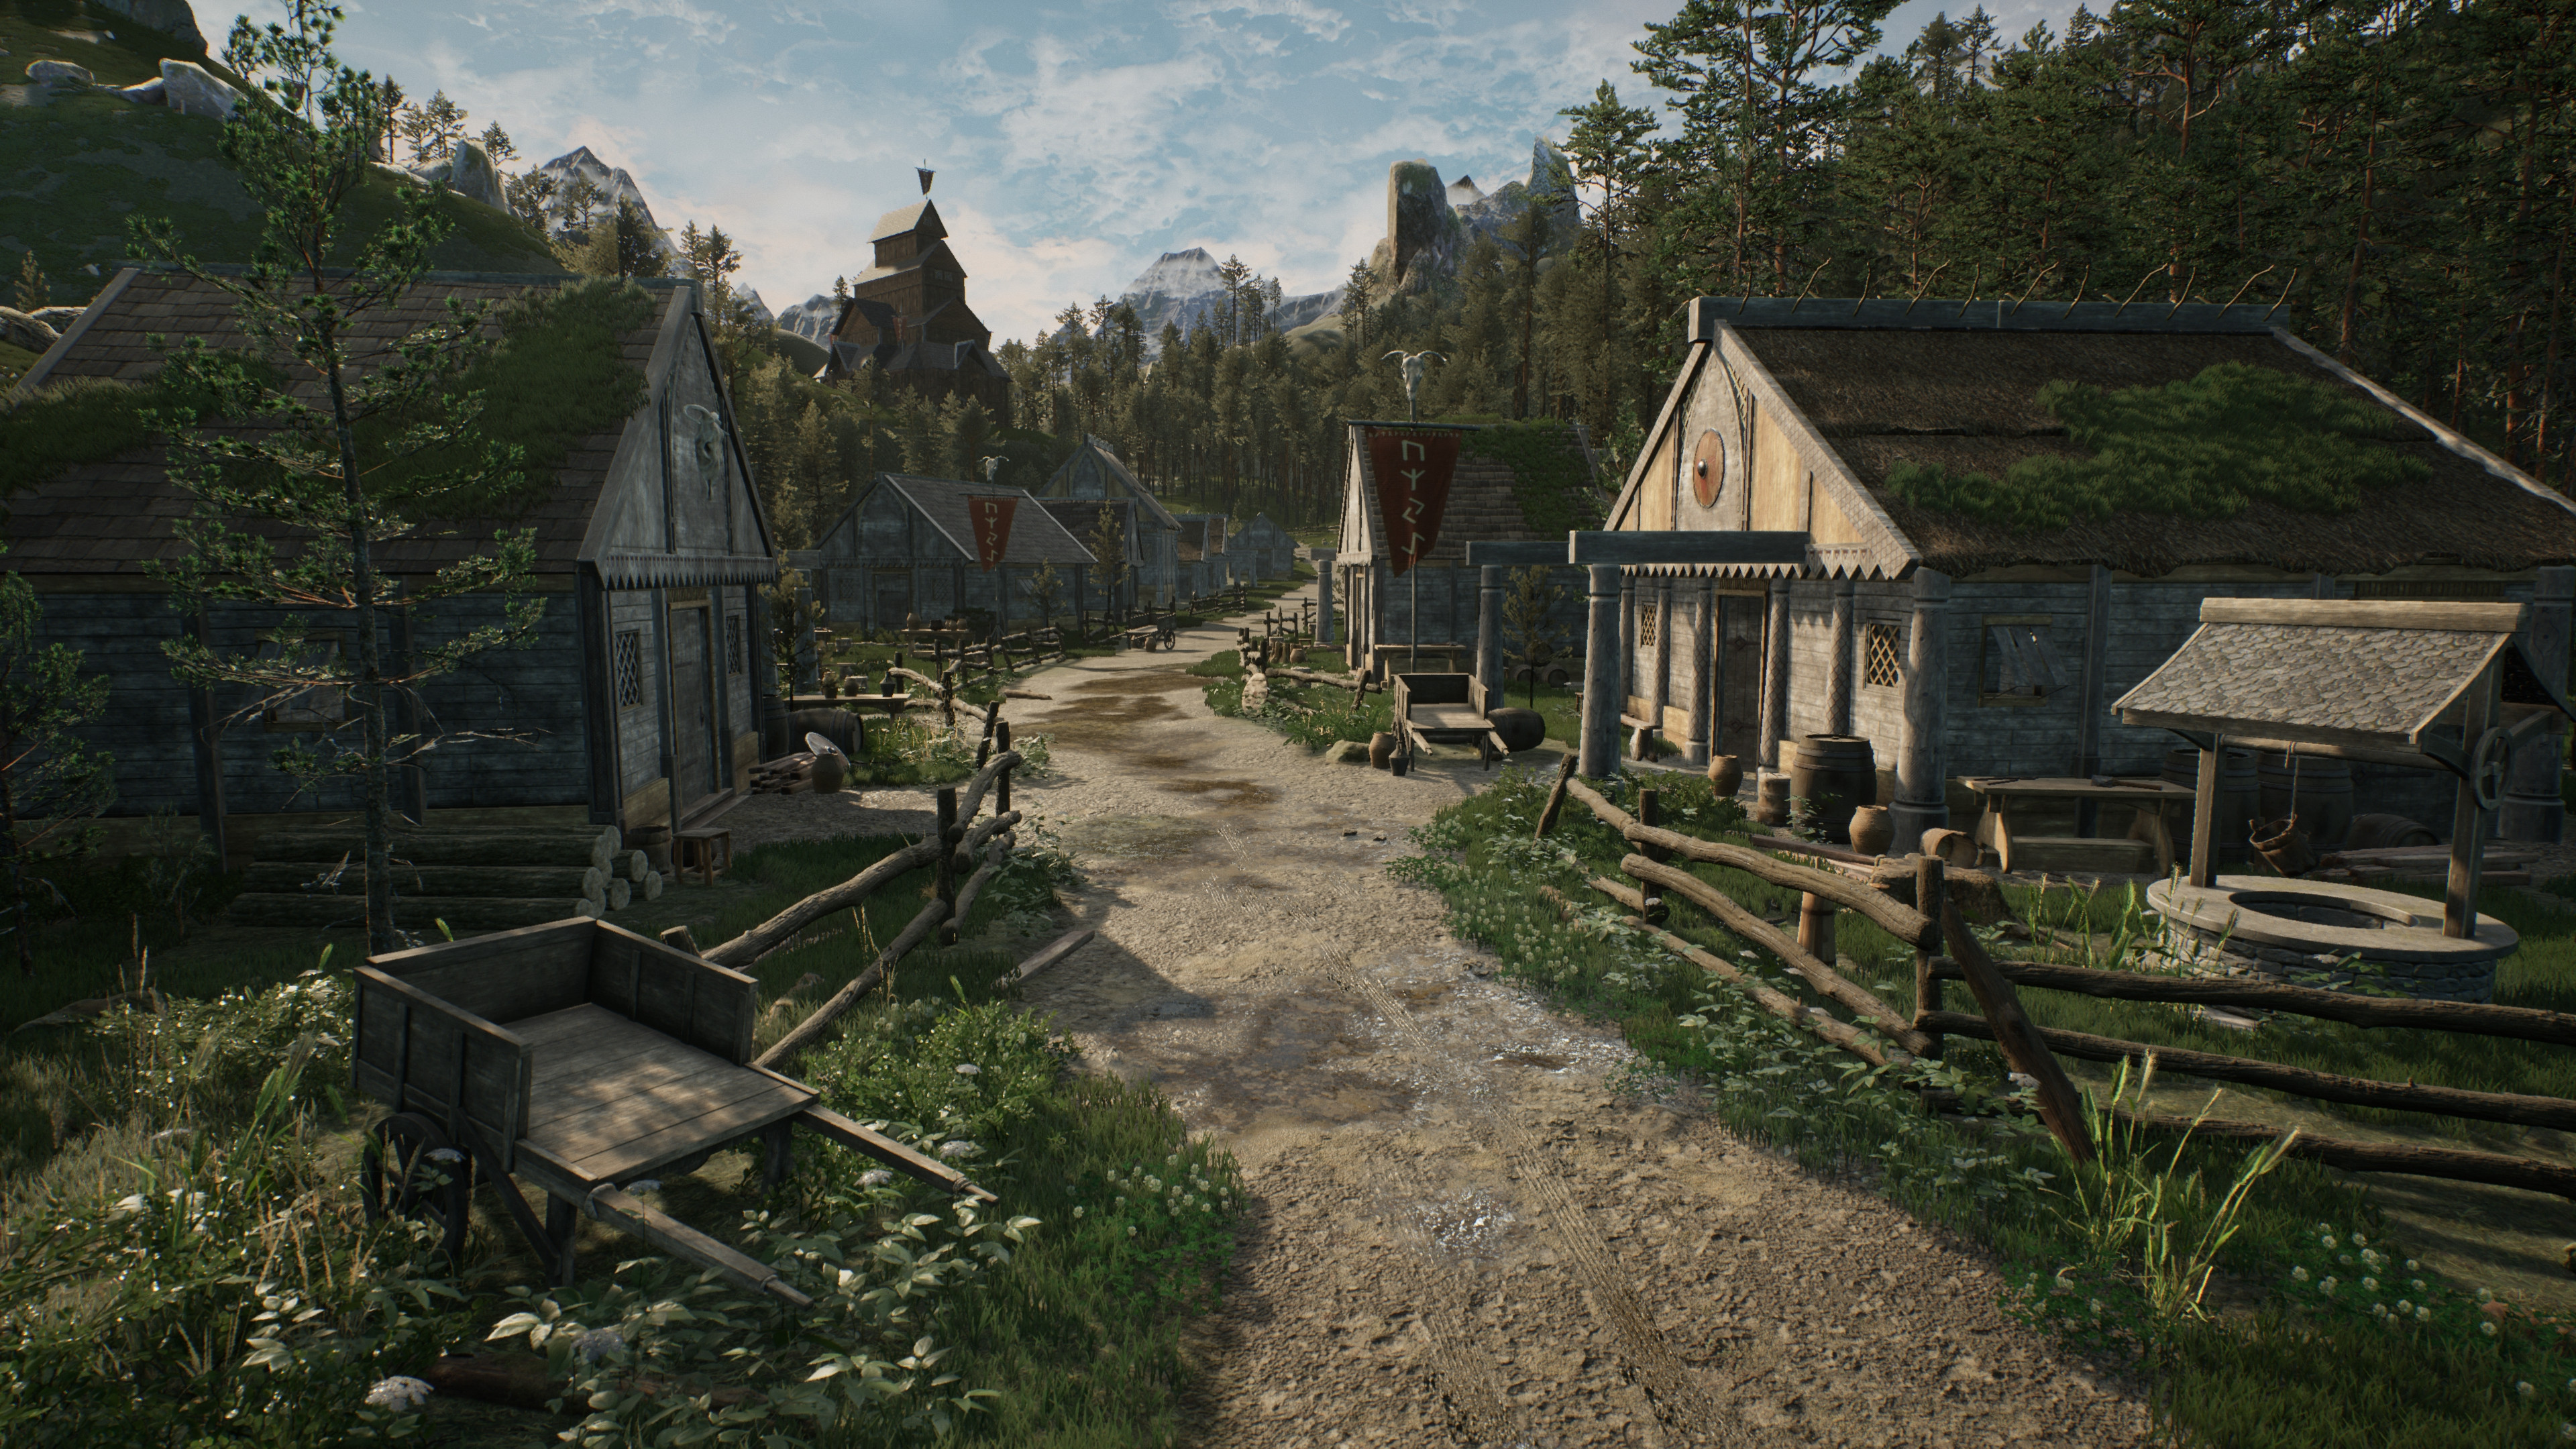 Scandinavian Village: This was the focal shot I spent the most time working on. I believe the terrain materials and foliage really helped bring the aesthetic of the world alive along with my basic materials consisting of woods, stones, bone, and linen.